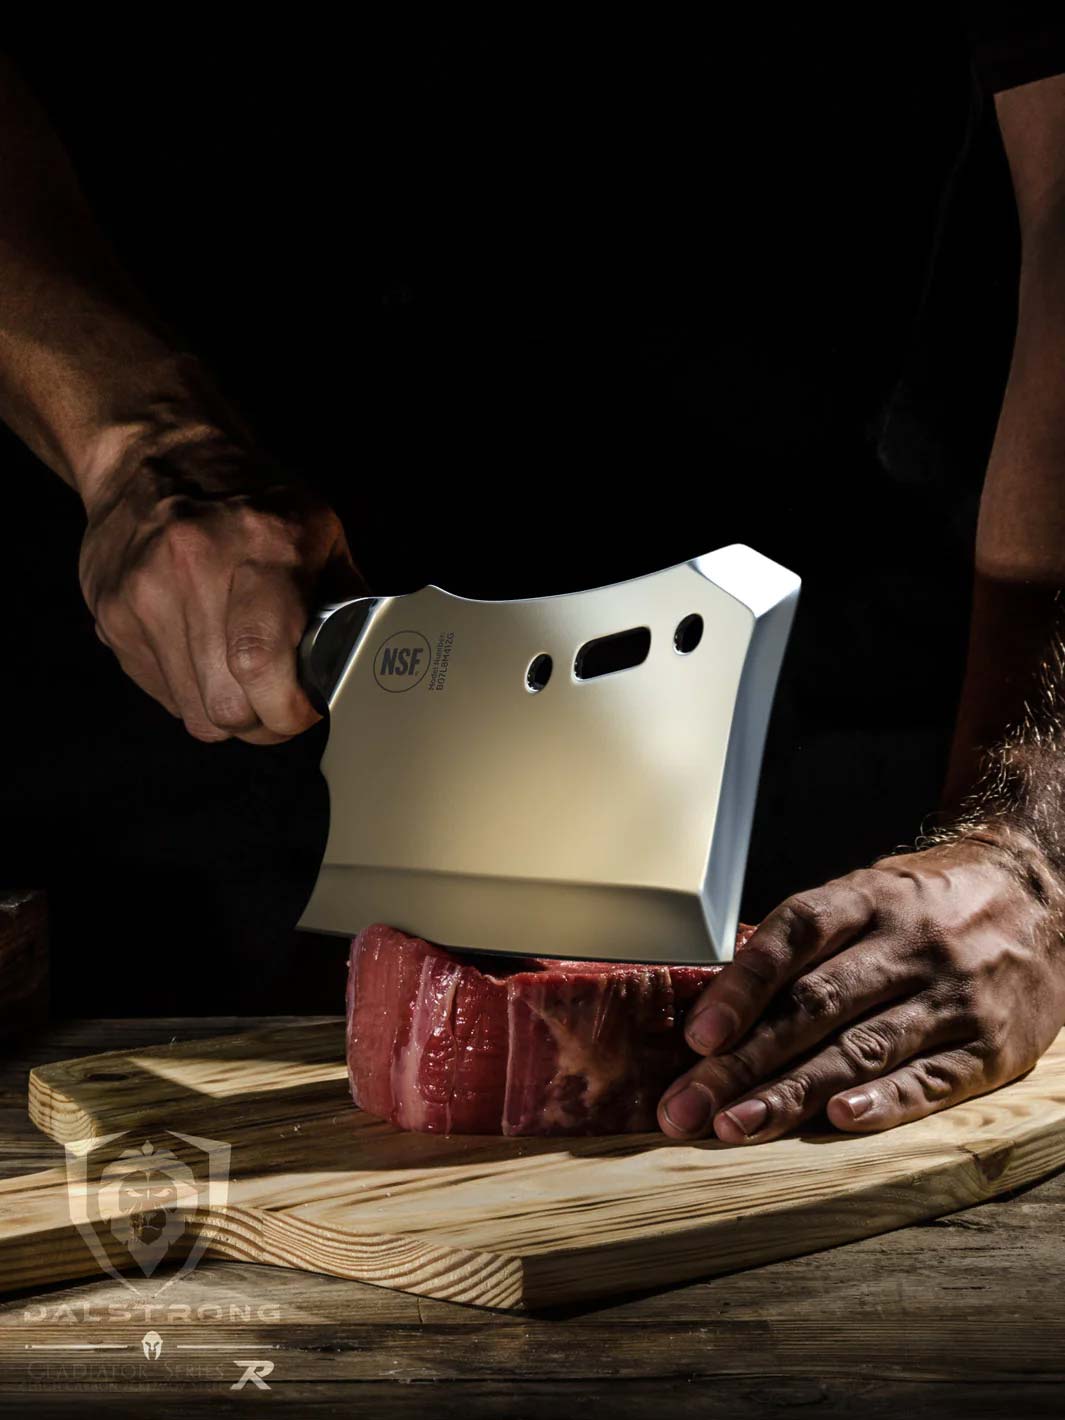 Dalstrong gladiator series 9 inch obliterator cleaver knife with black handle and a large cut of meat on a wooden board.